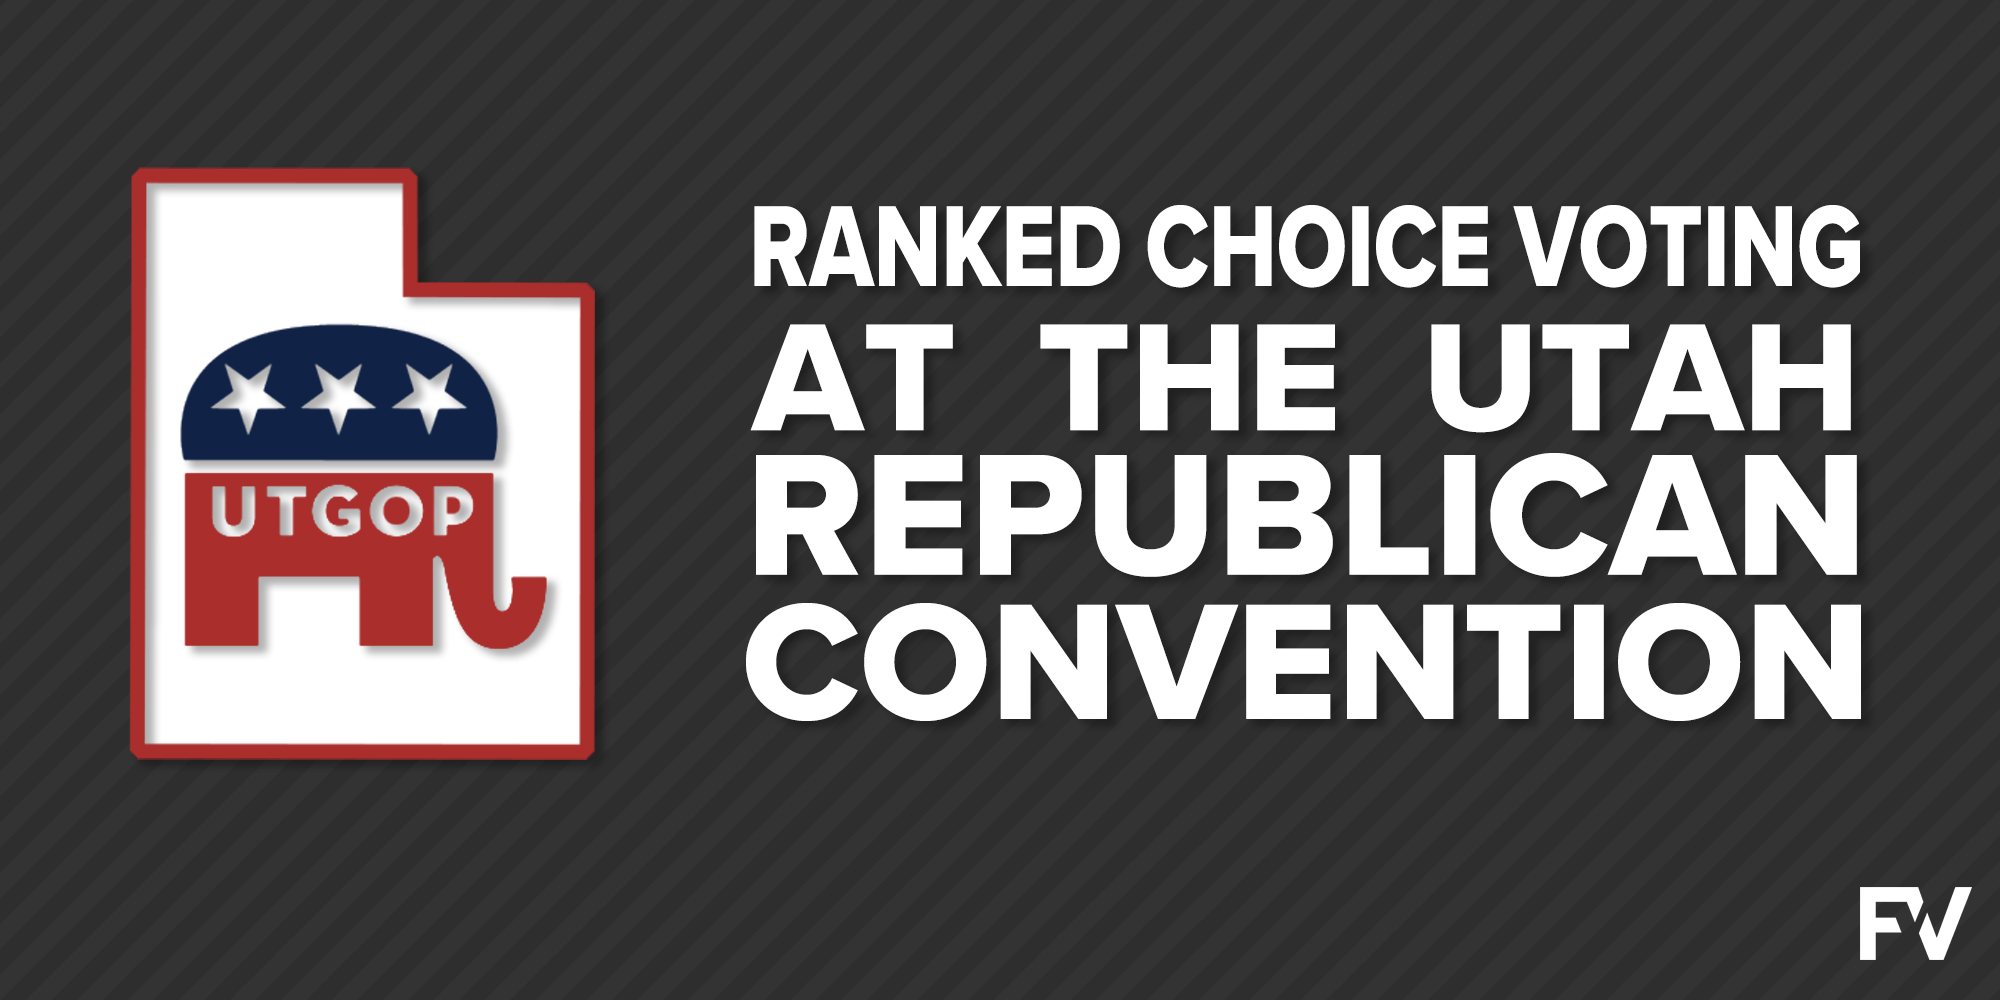 Ranked choice voting impacts eight races at the Utah GOP Convention